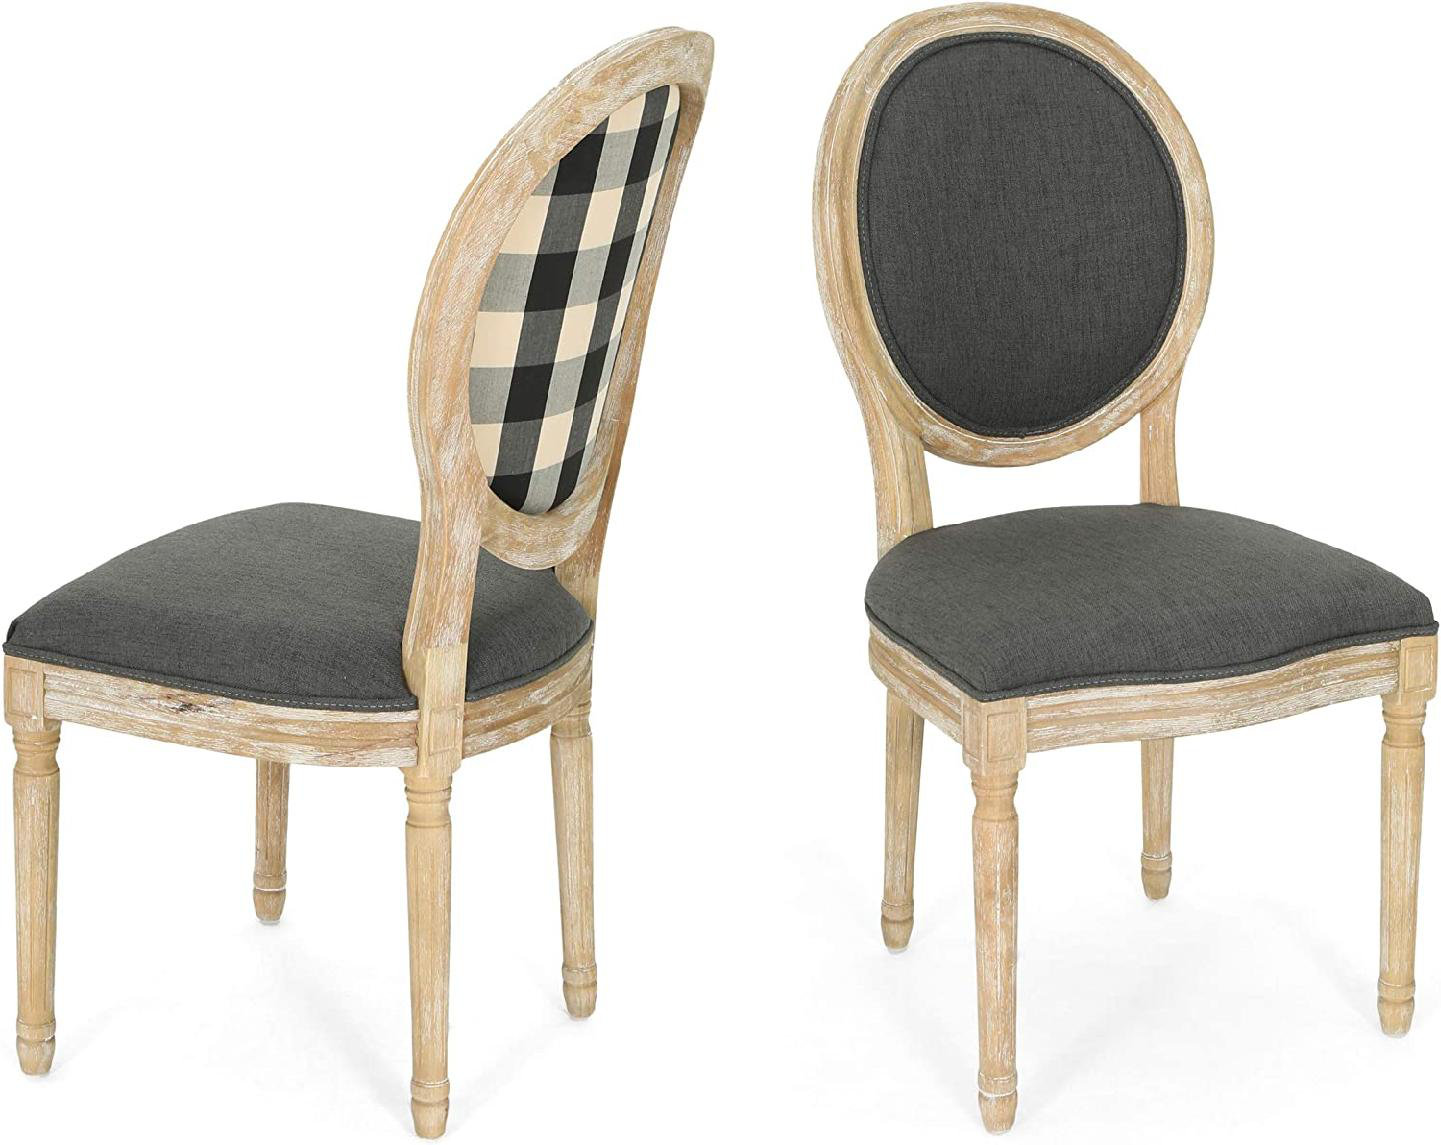 Cleek King Louis Back Side Chair (Set of 2) One Allium Way Upholstery Color: Beige